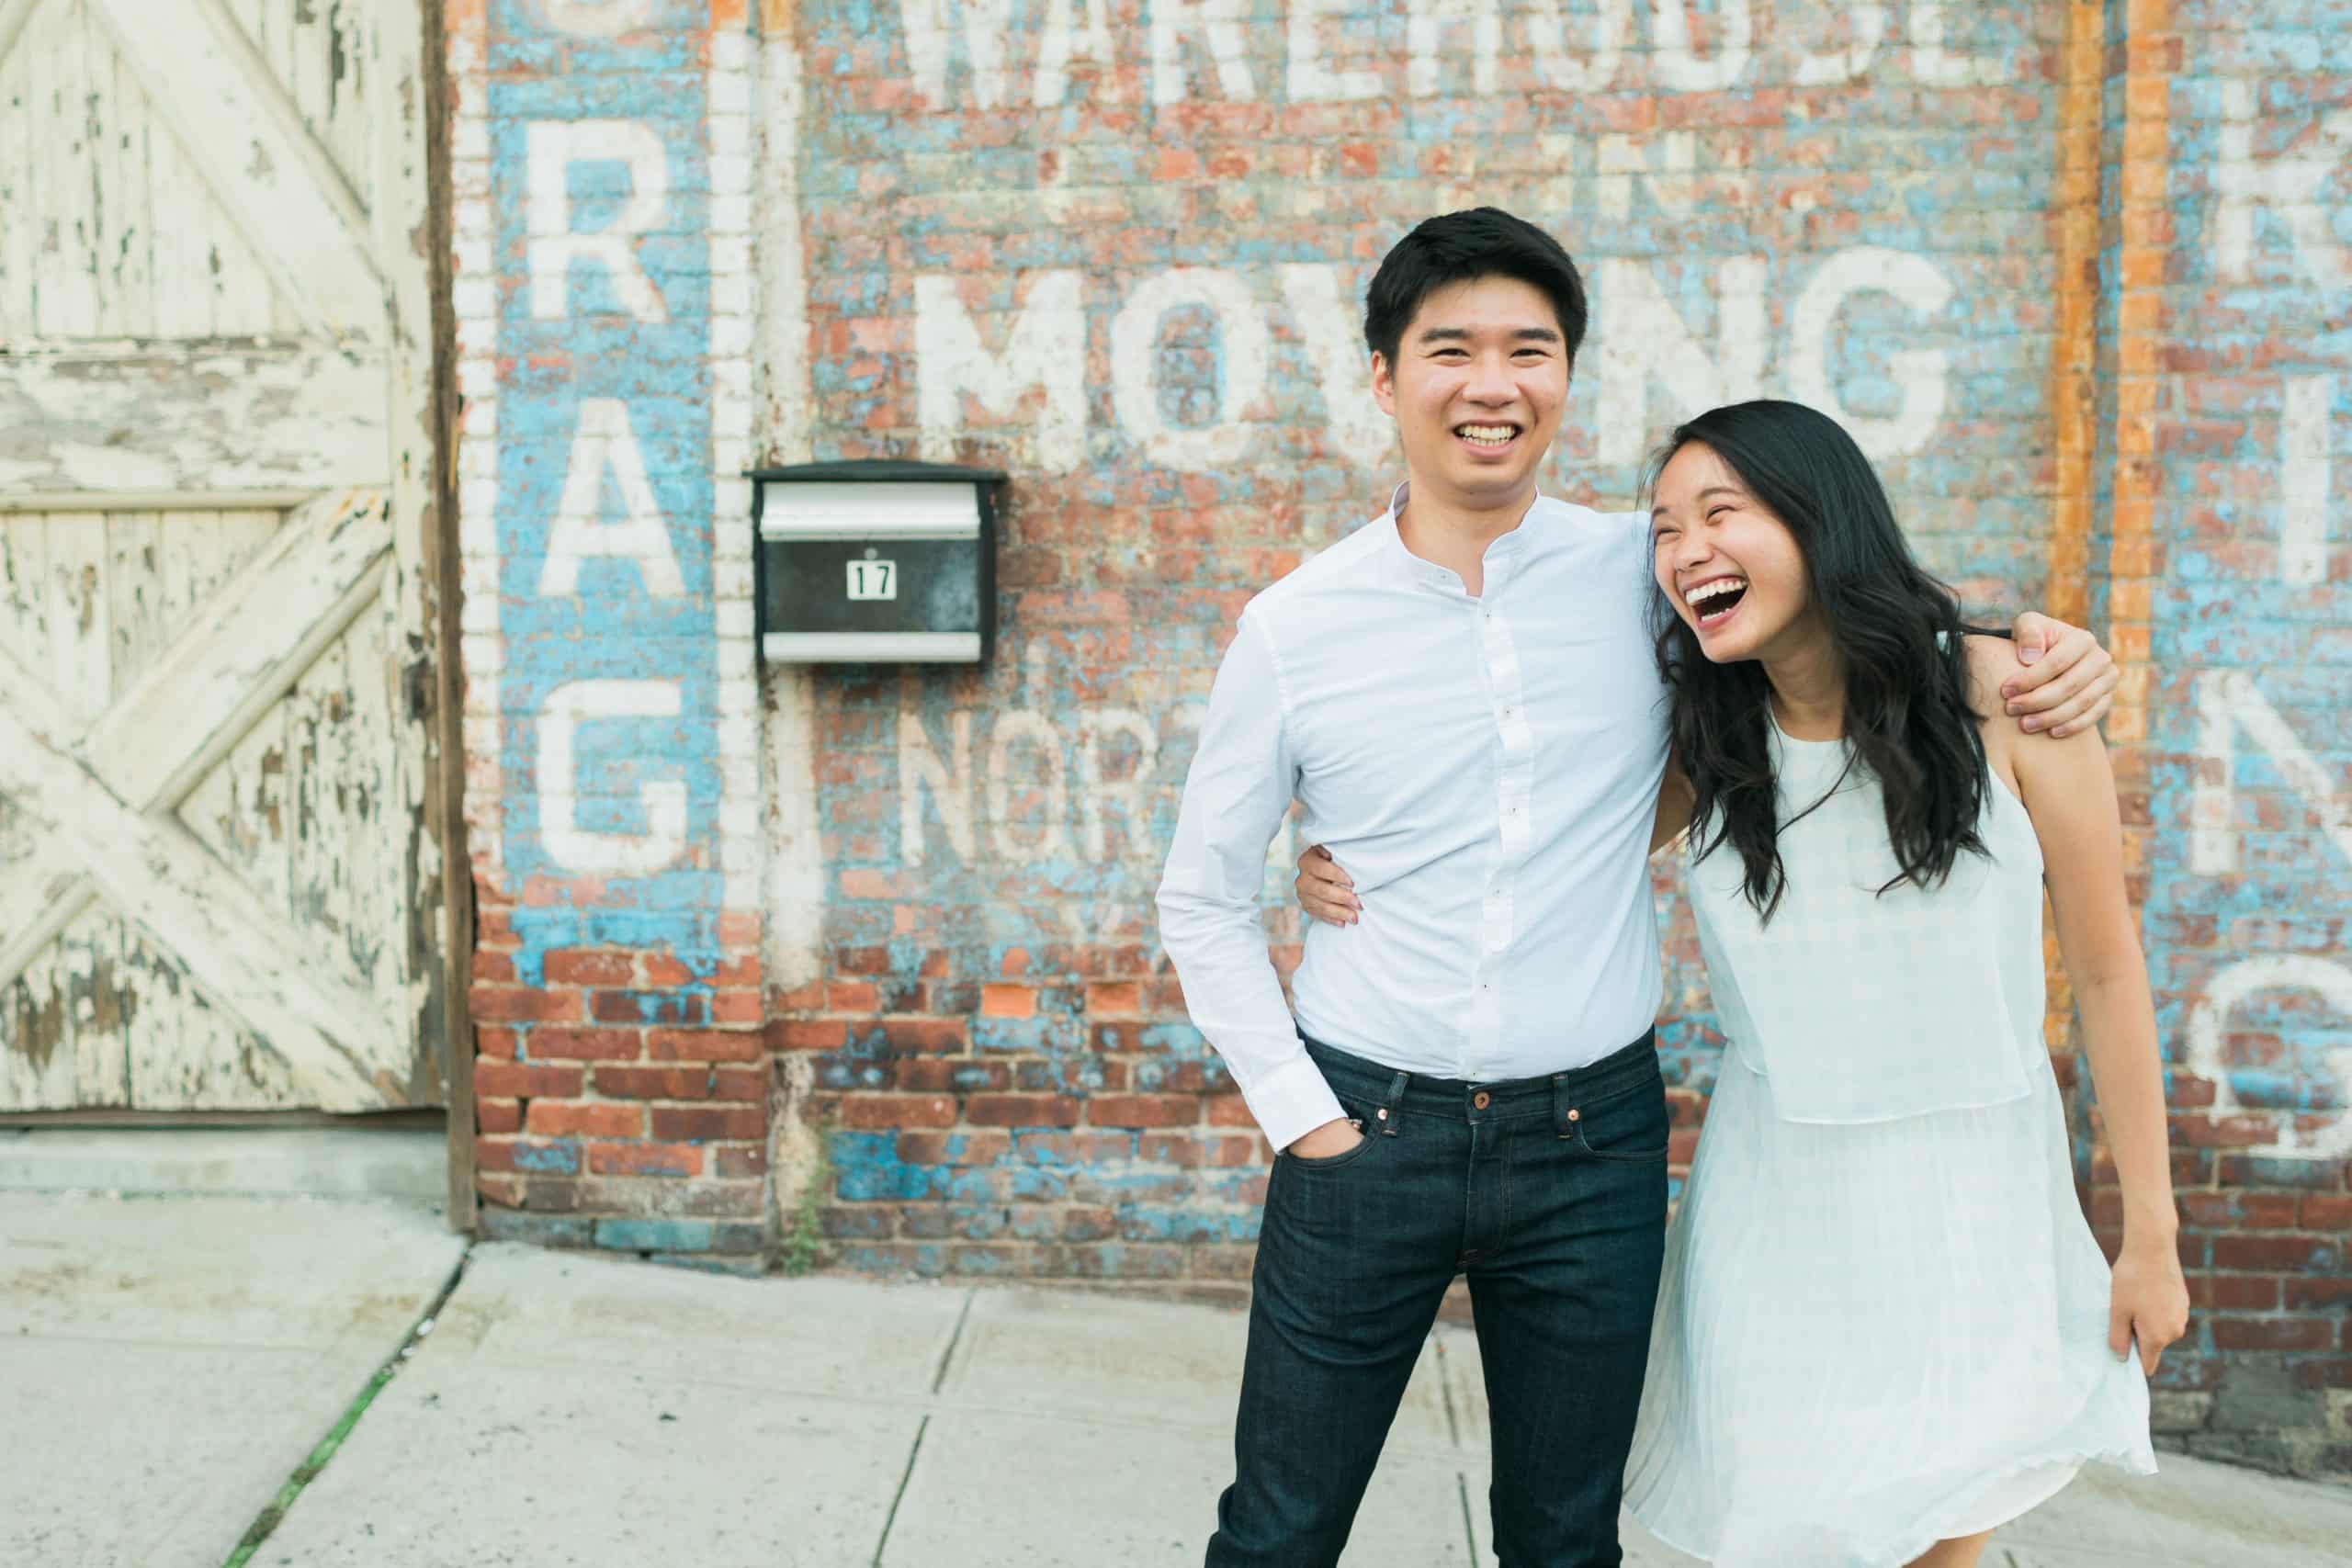 Rockefeller State Park engagement session in Westchester, captured by fun NYC wedding photographer Ben Lau.